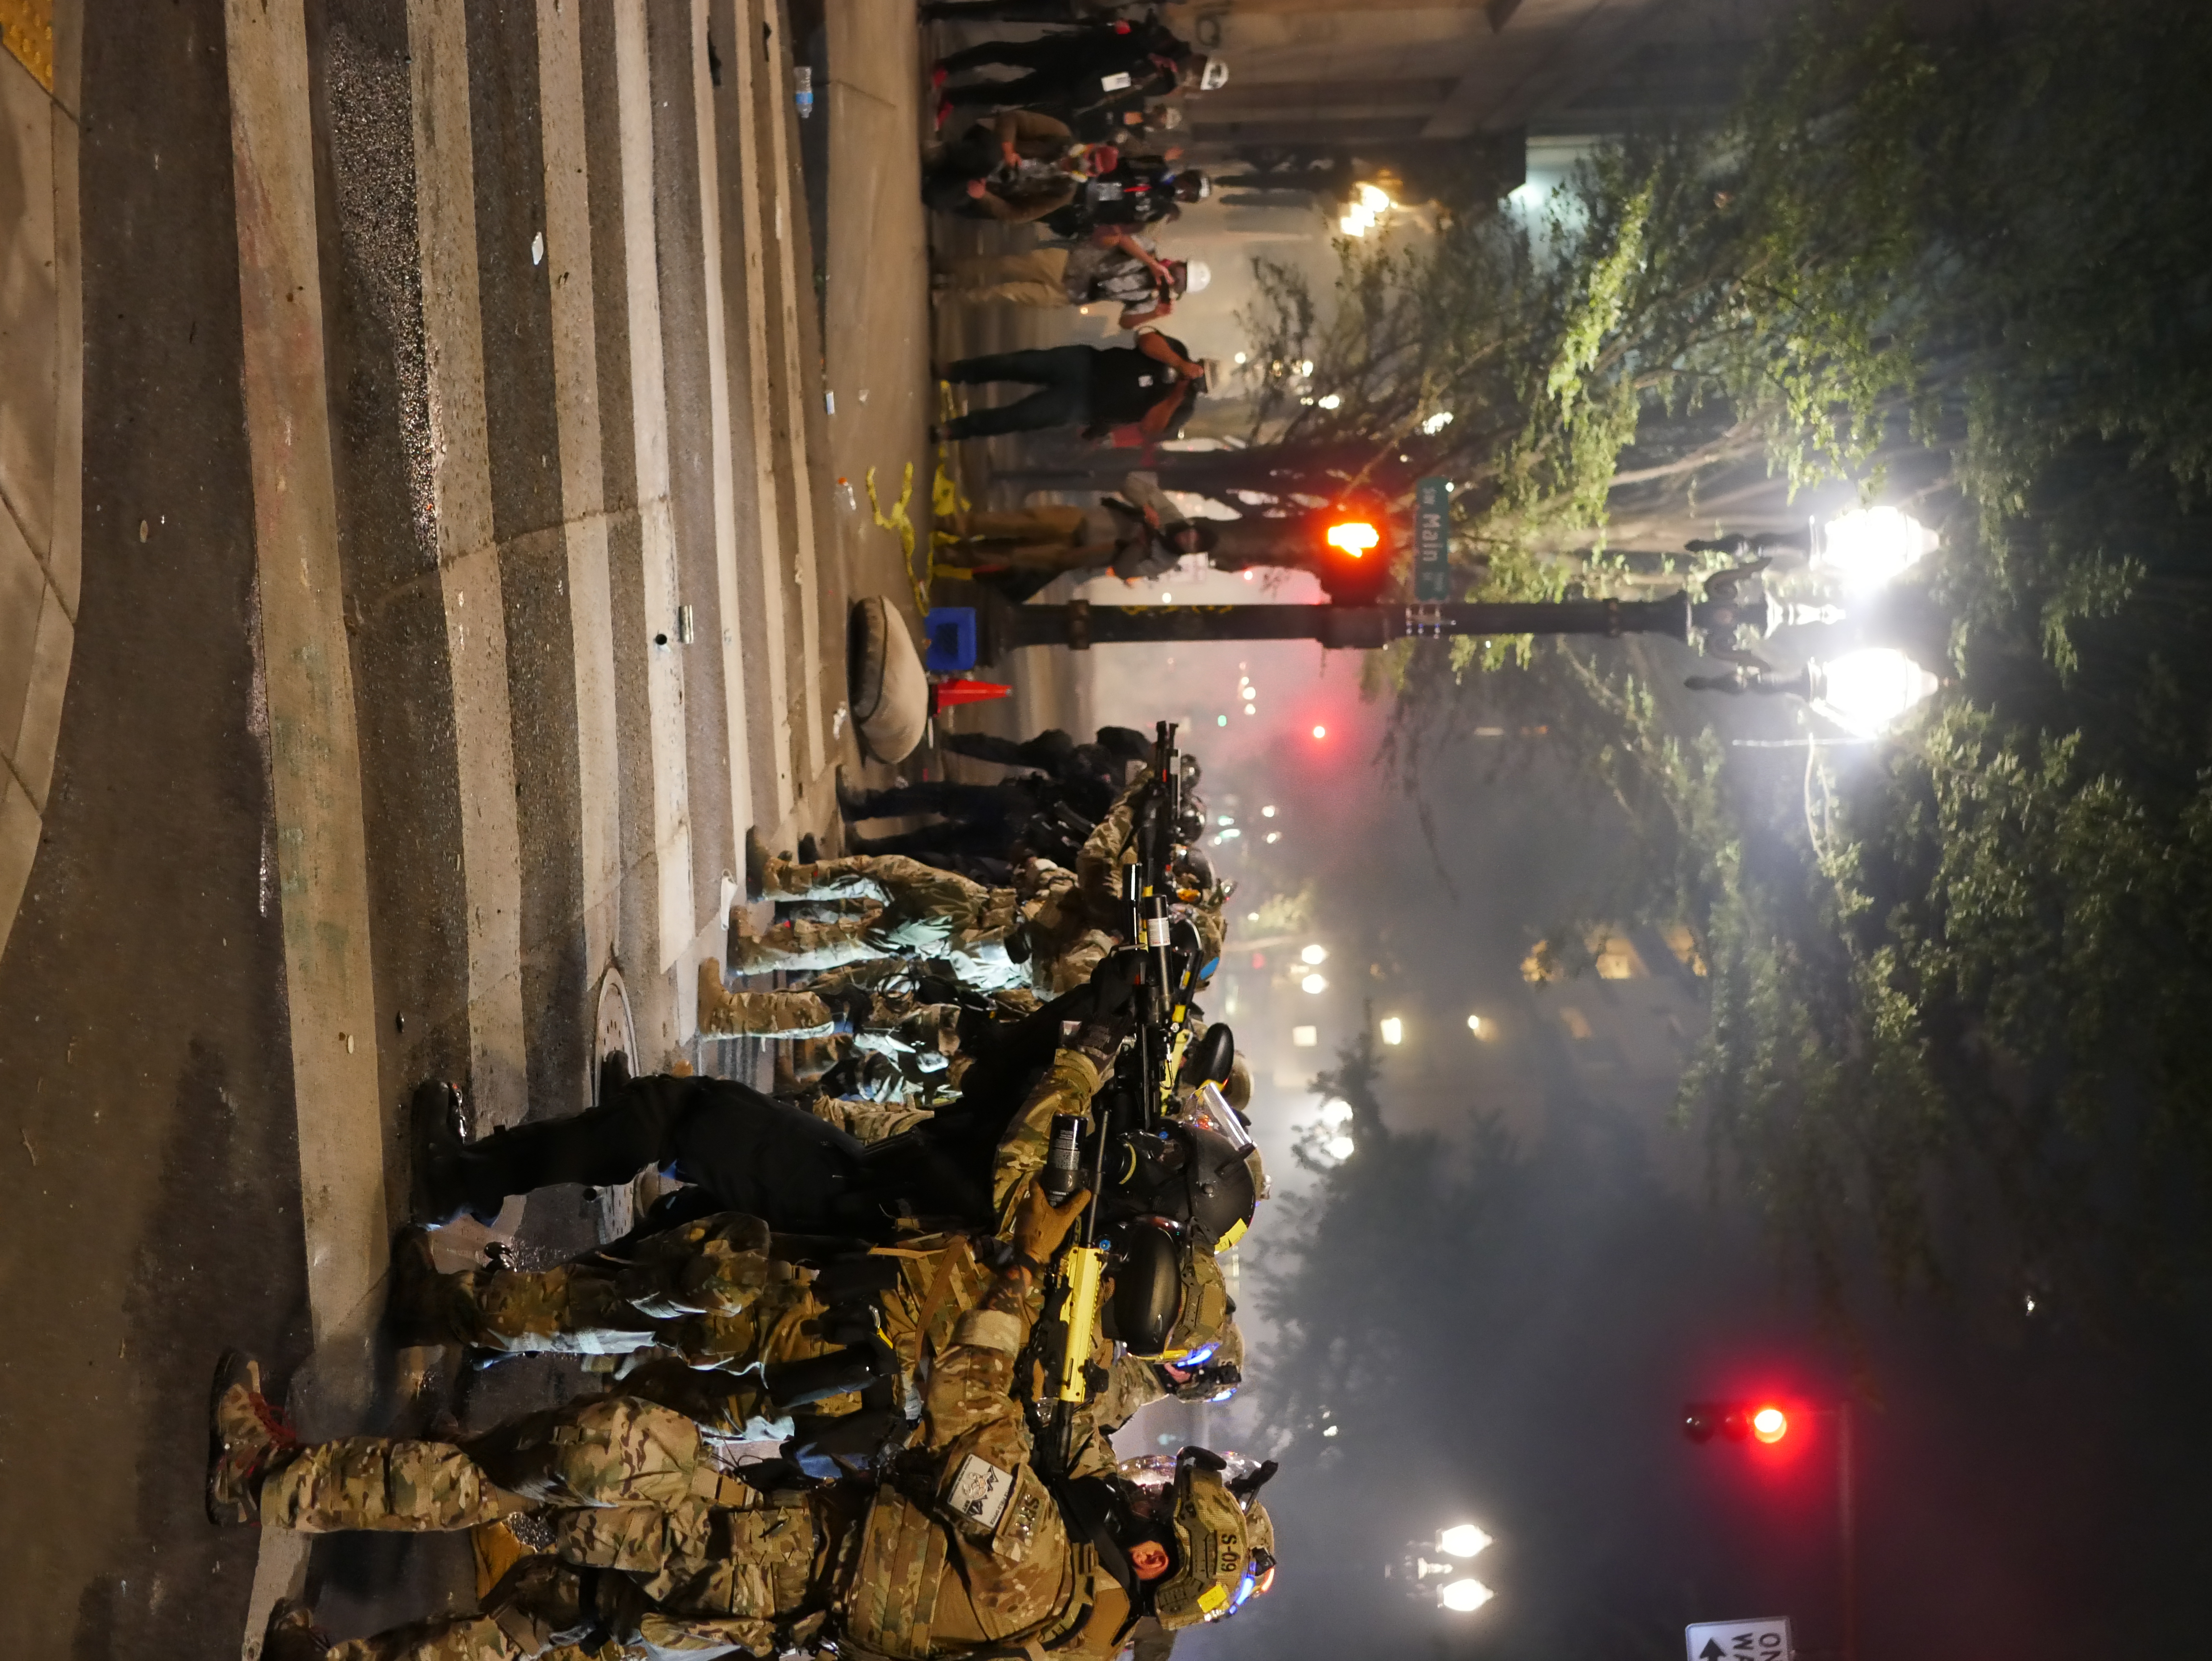 Photograph of a standoff of police officer guns raised, dressed in full camouflage protective gear on the streets of downtown PDX.